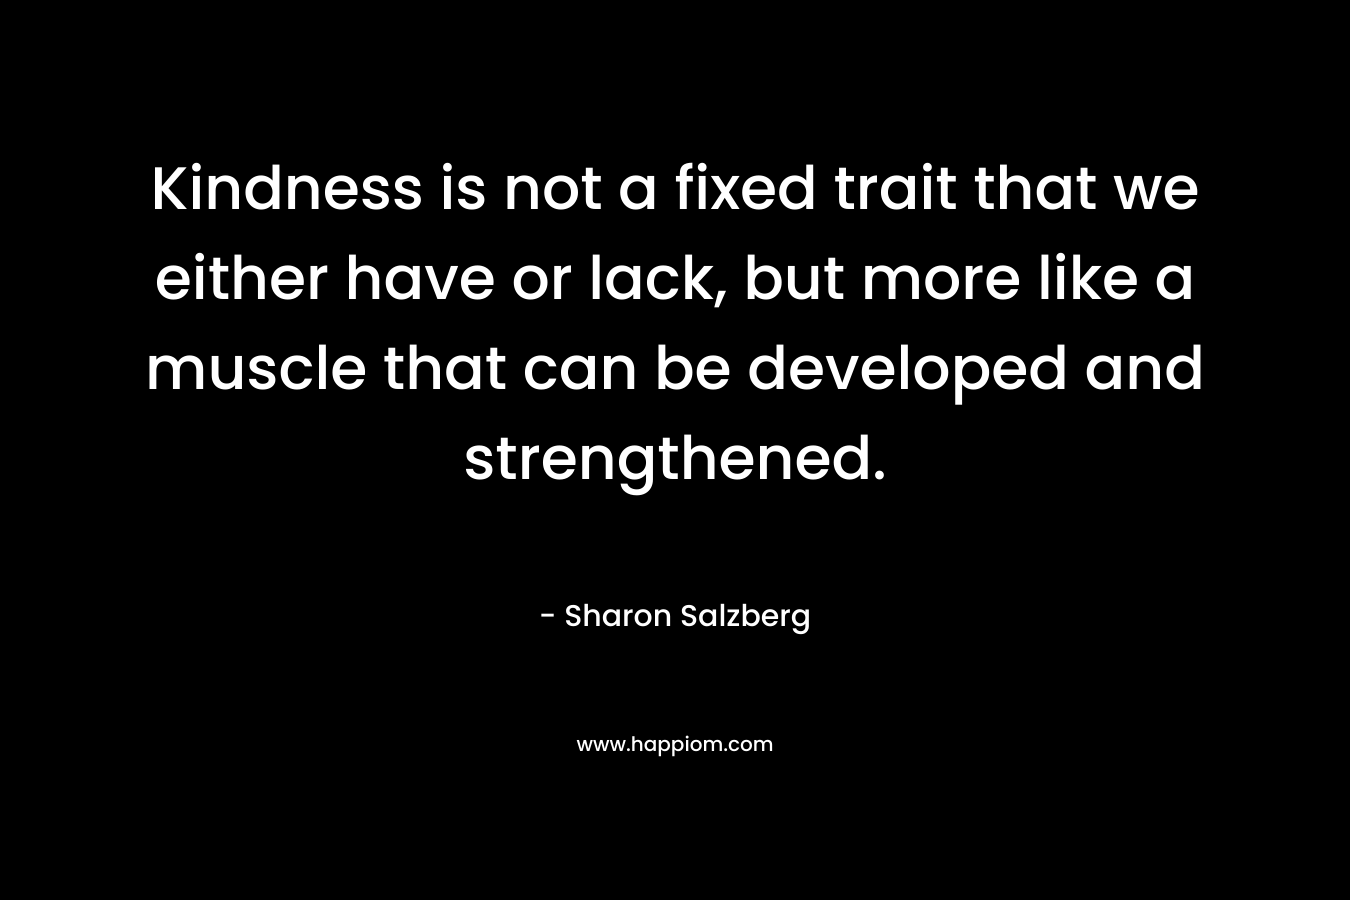 Kindness is not a fixed trait that we either have or lack, but more like a muscle that can be developed and strengthened.